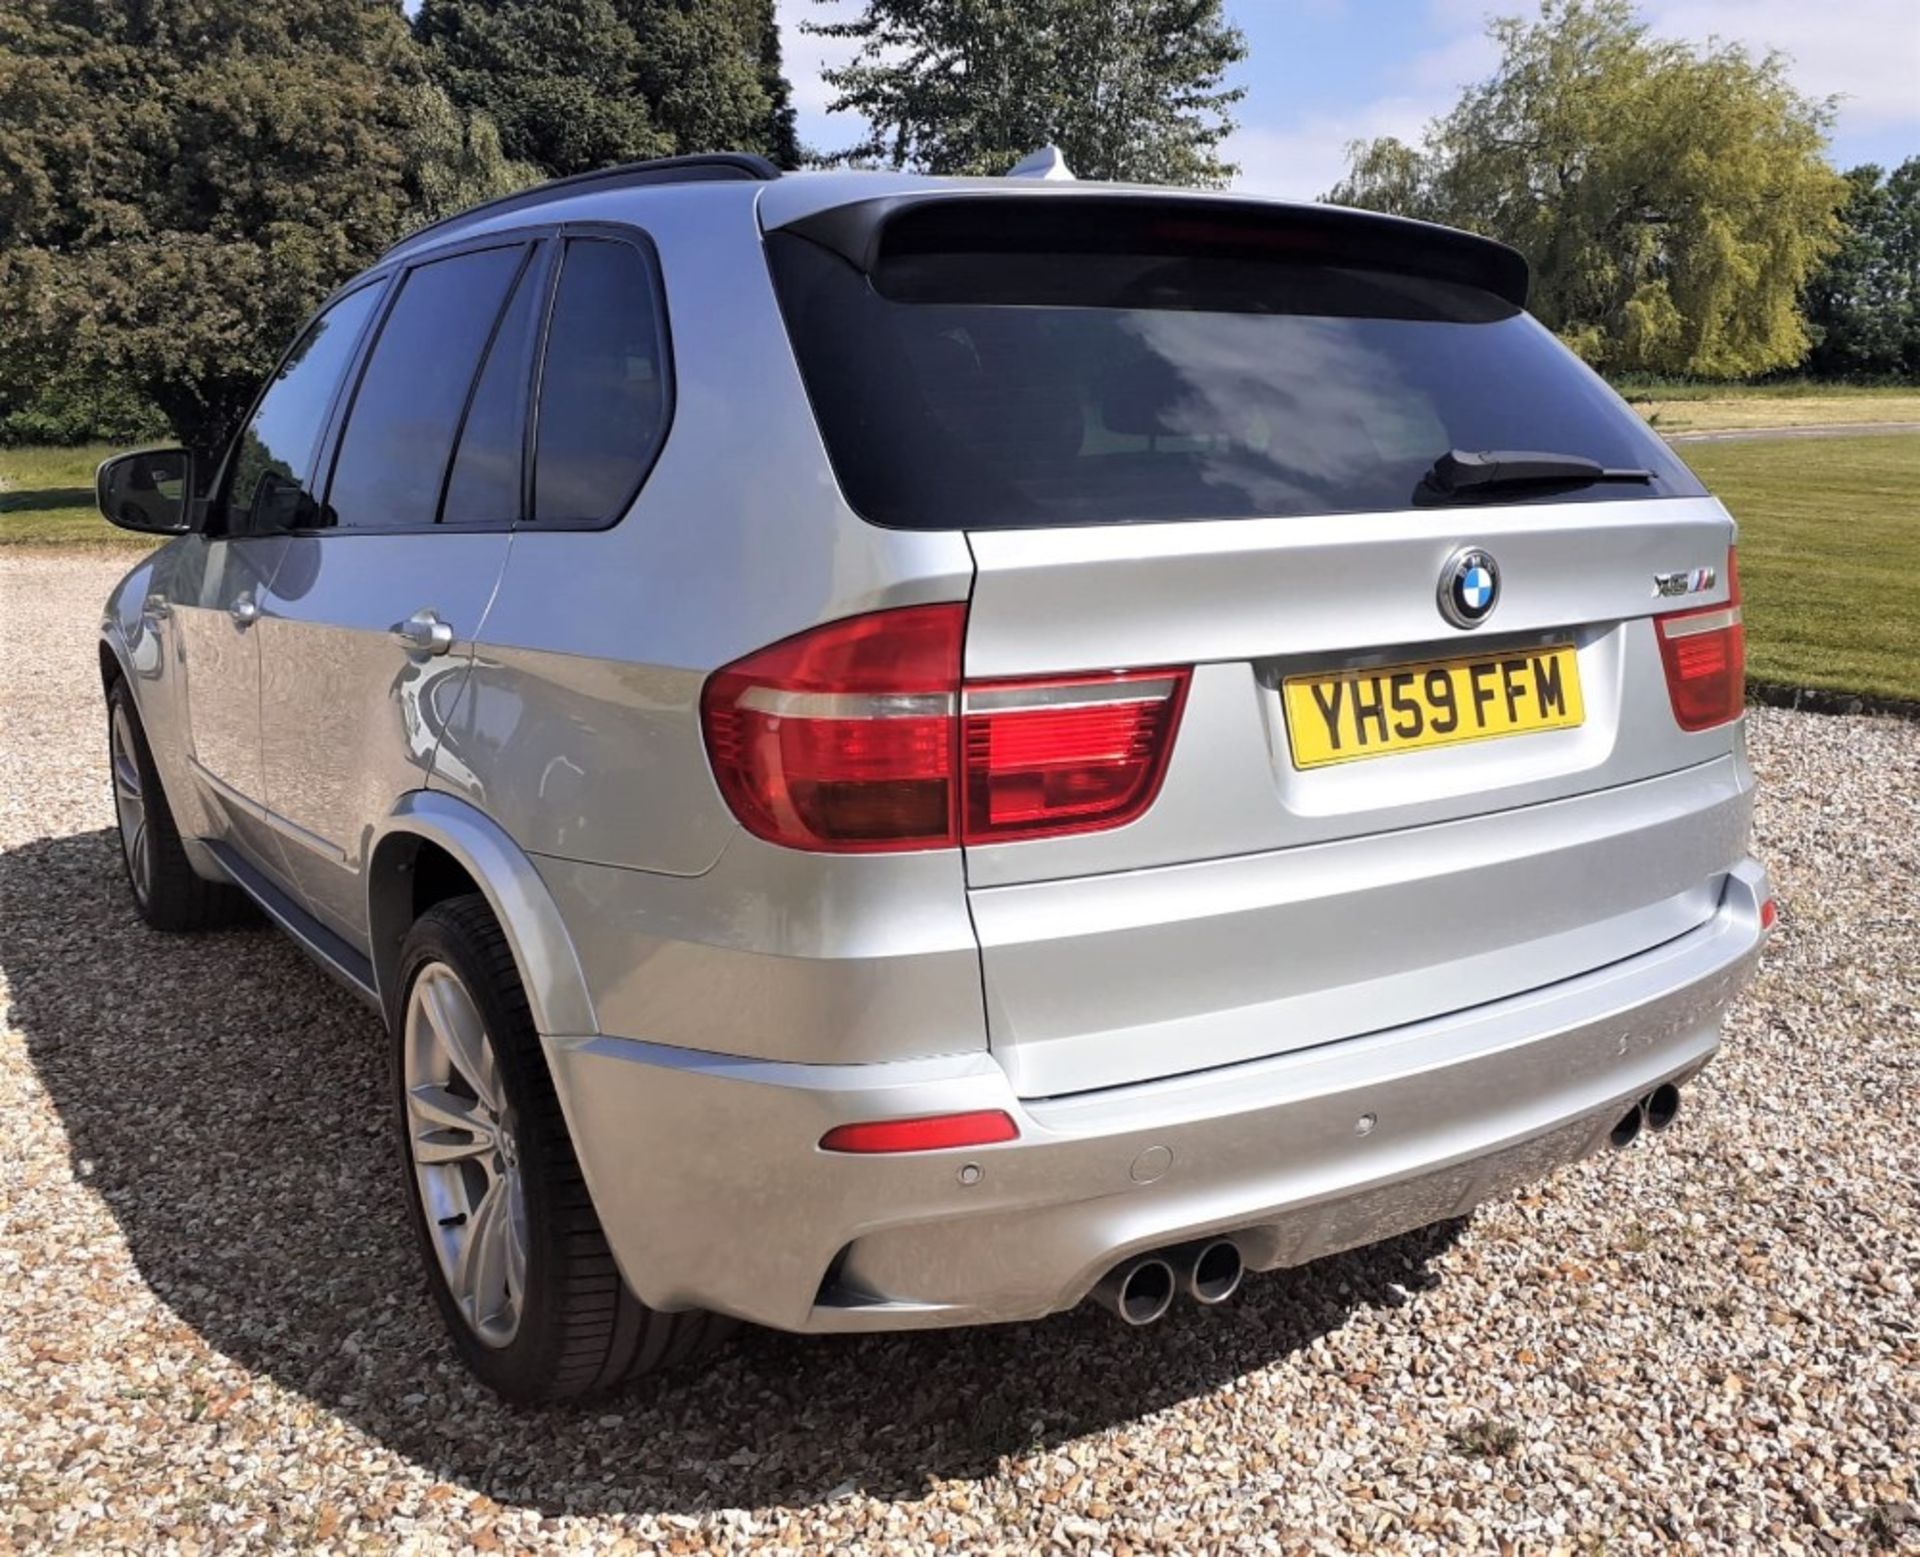 2009 BMW X5 M Registration Number:YH59 FFM Chassis Number: TBA Recorded Mileage: 125,000 miles - Two - Image 5 of 17